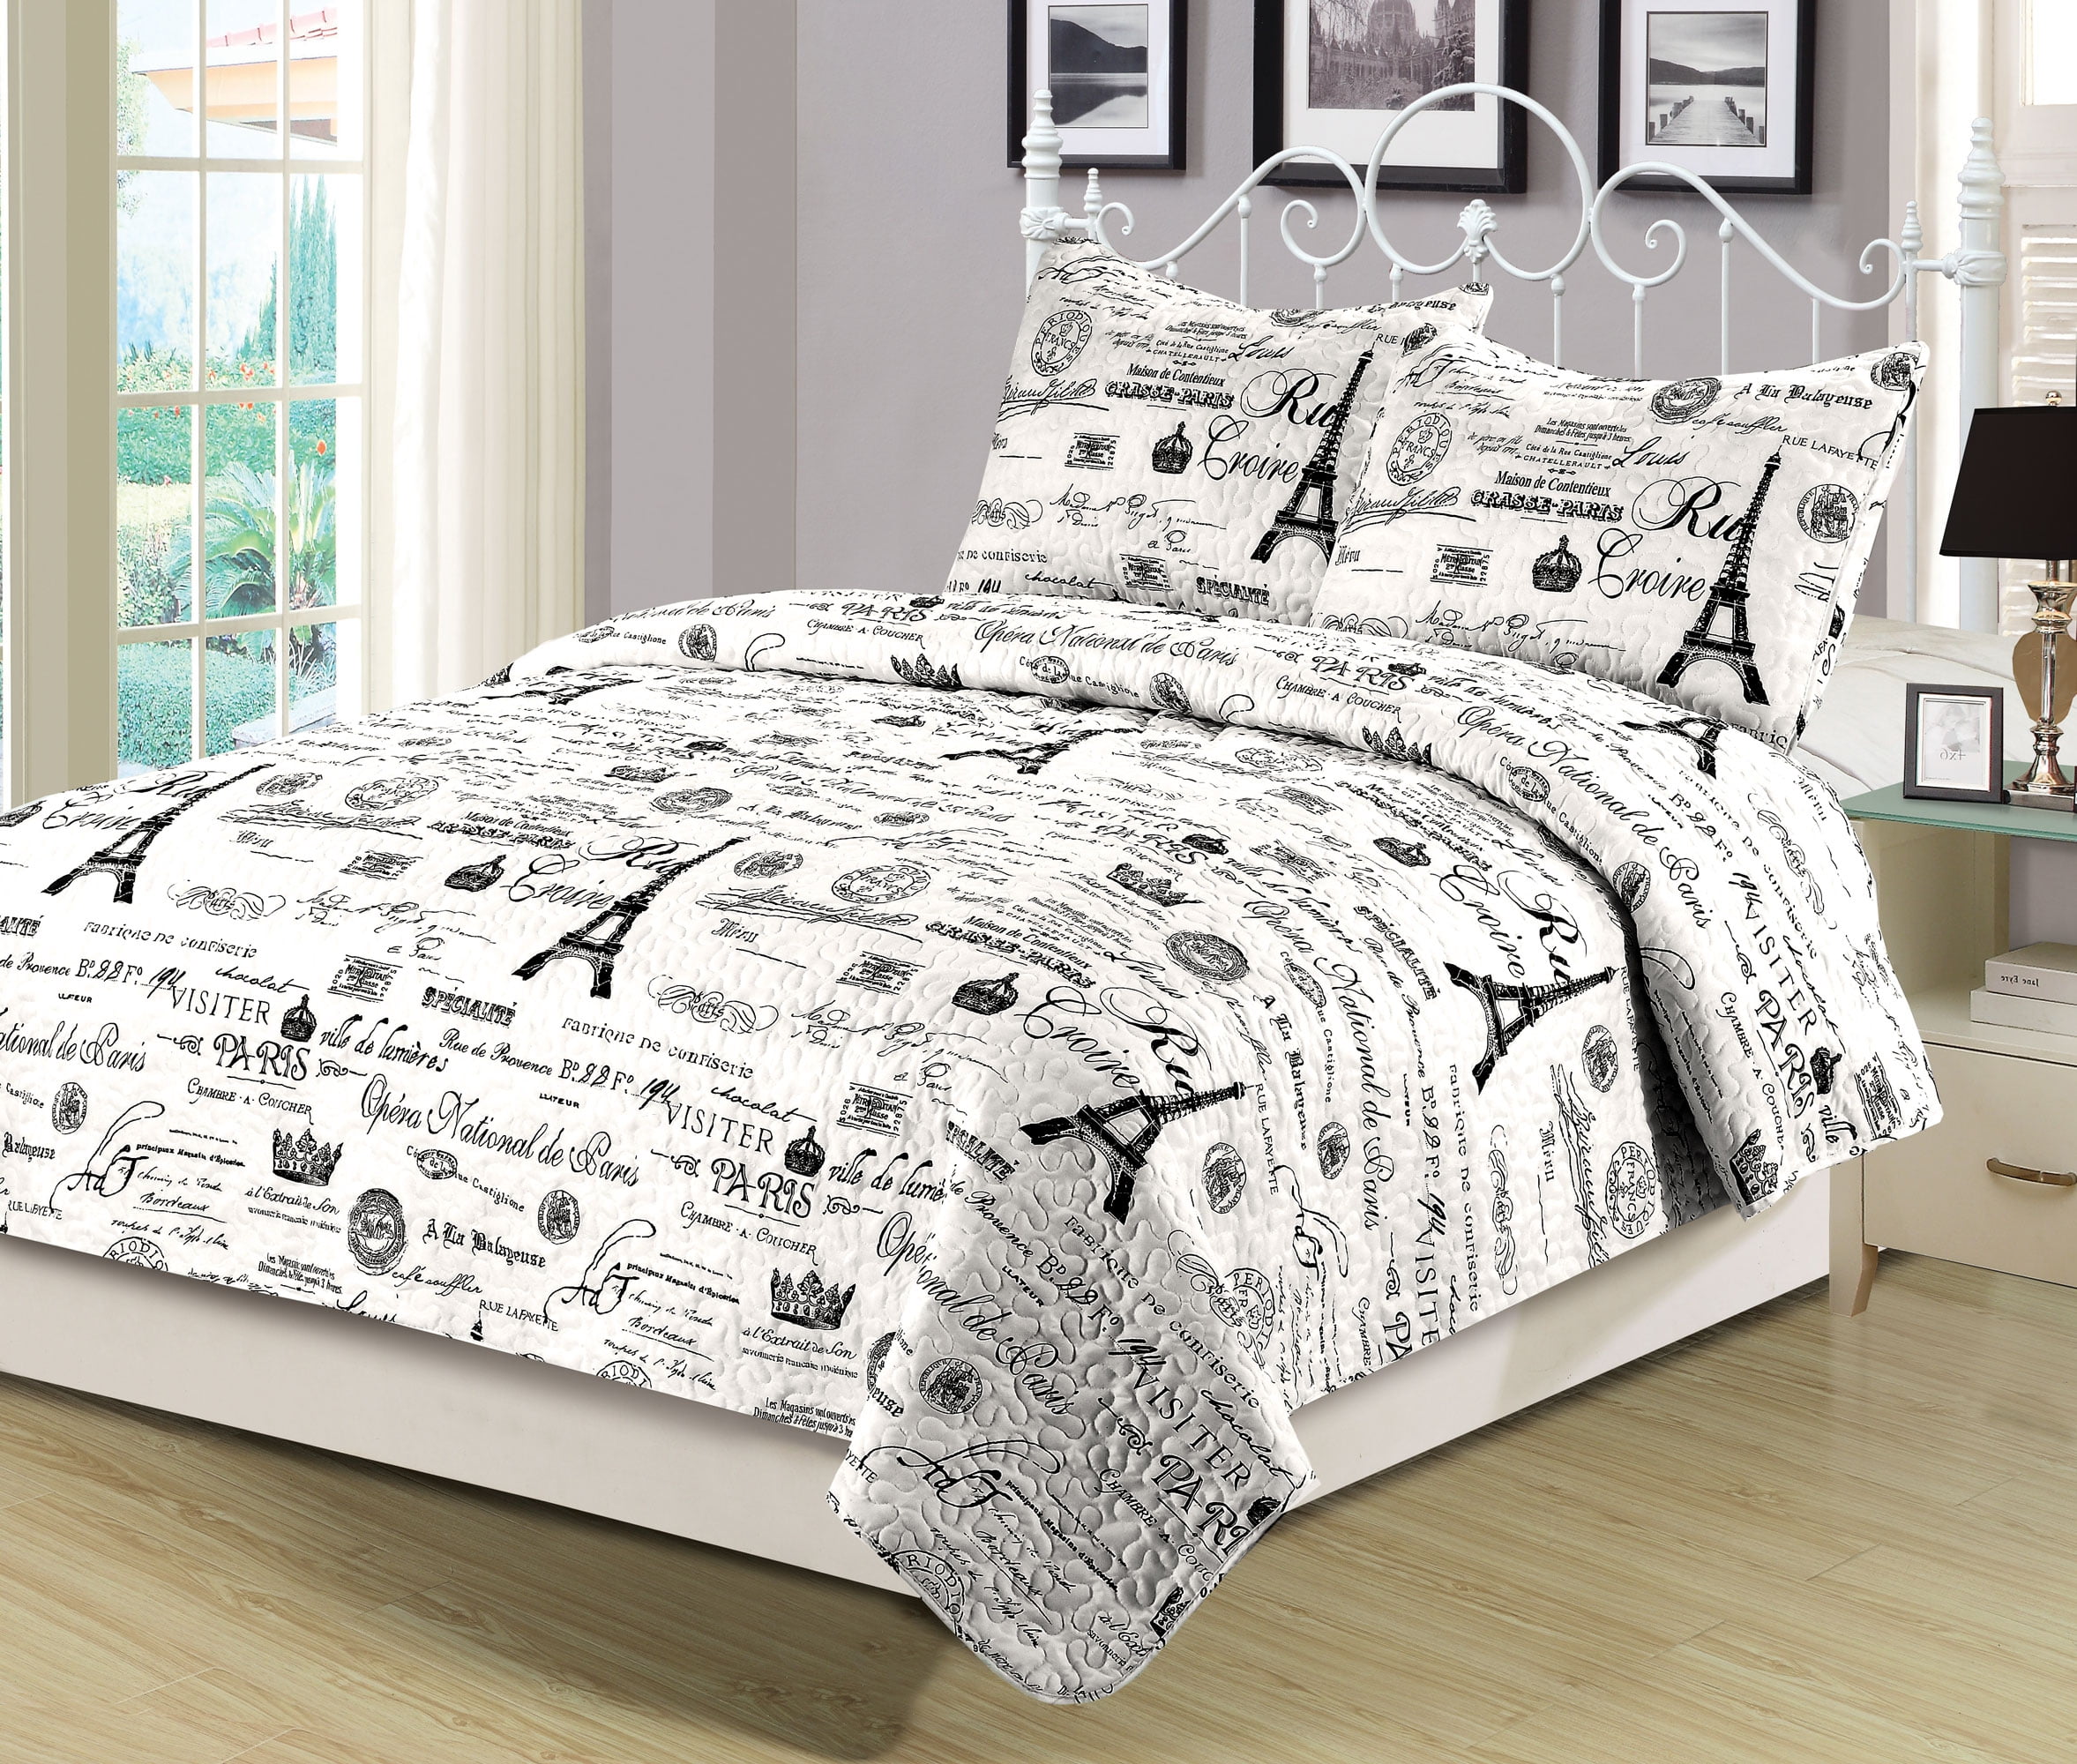 Queen Black and White or King Size Bedding Quilt Set Paris Eiffel Tower Twin 